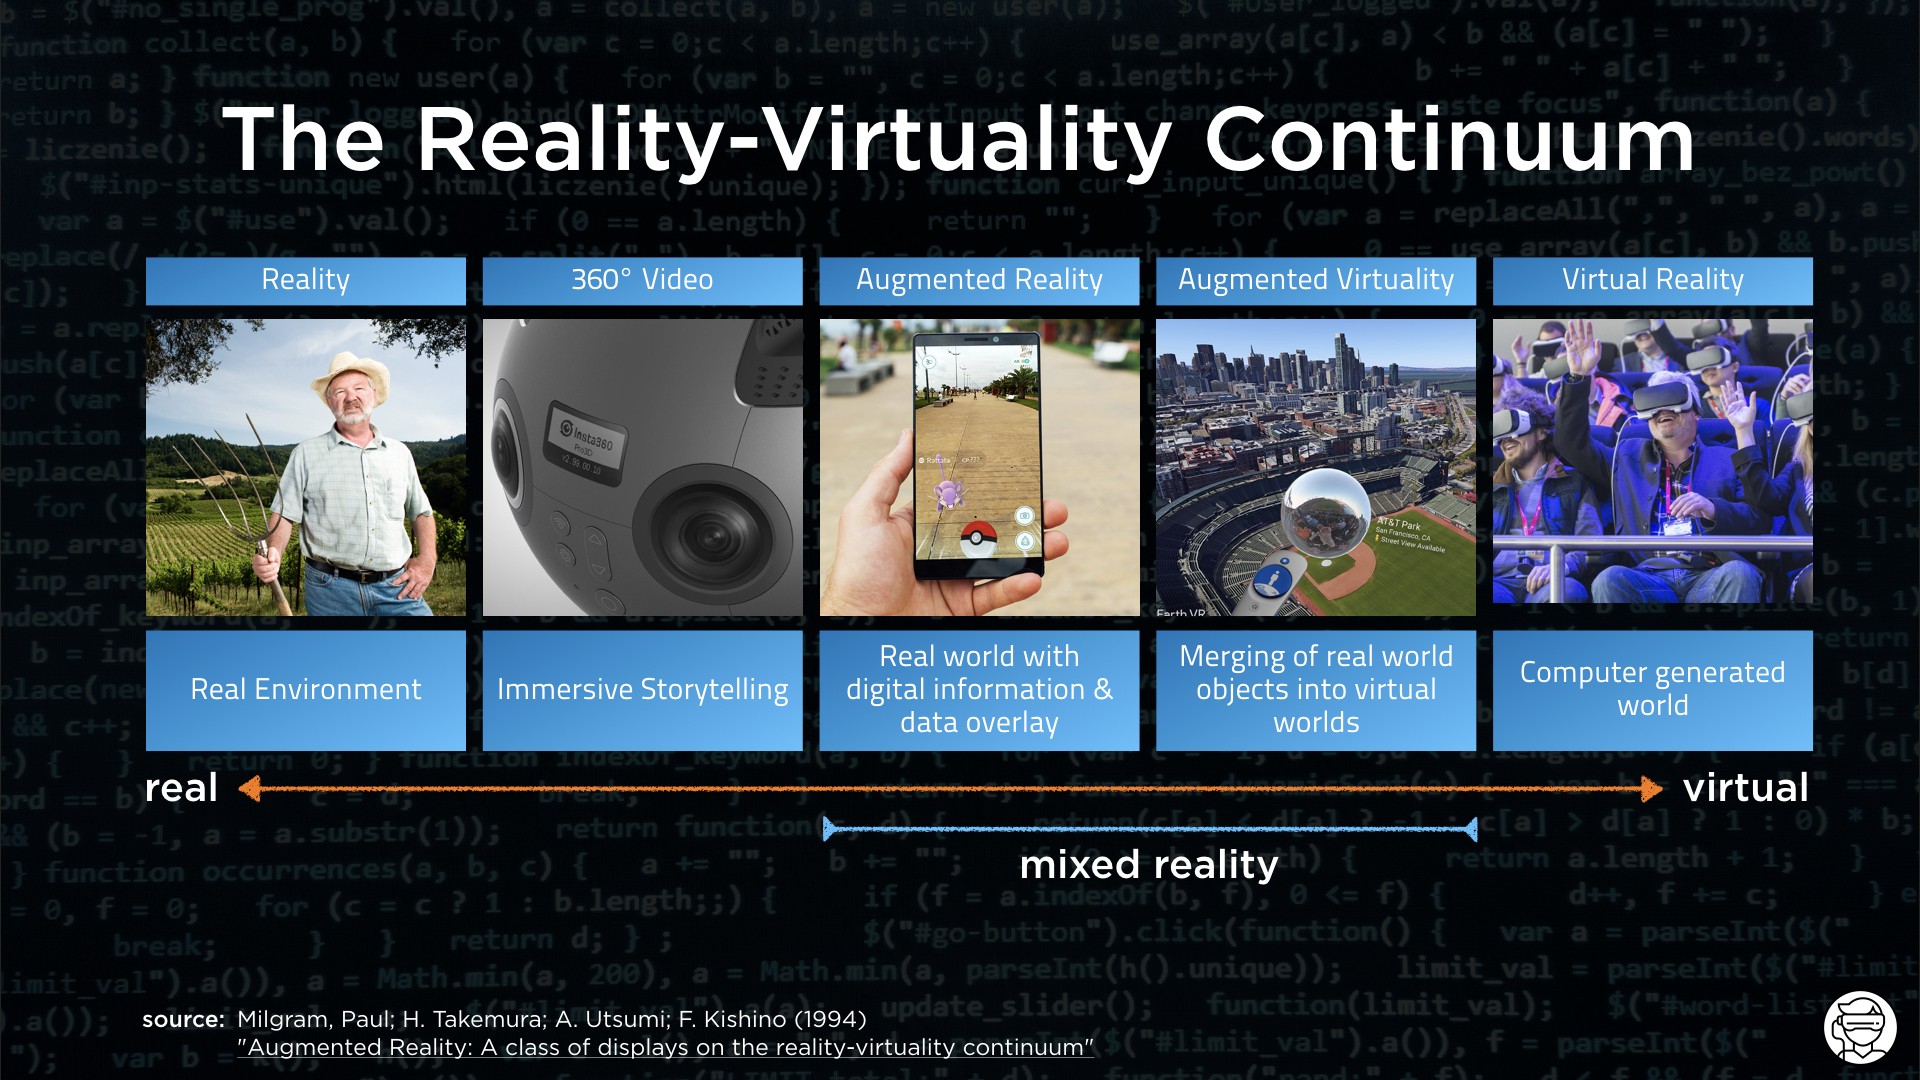 The Reality-Virtuality Continuum